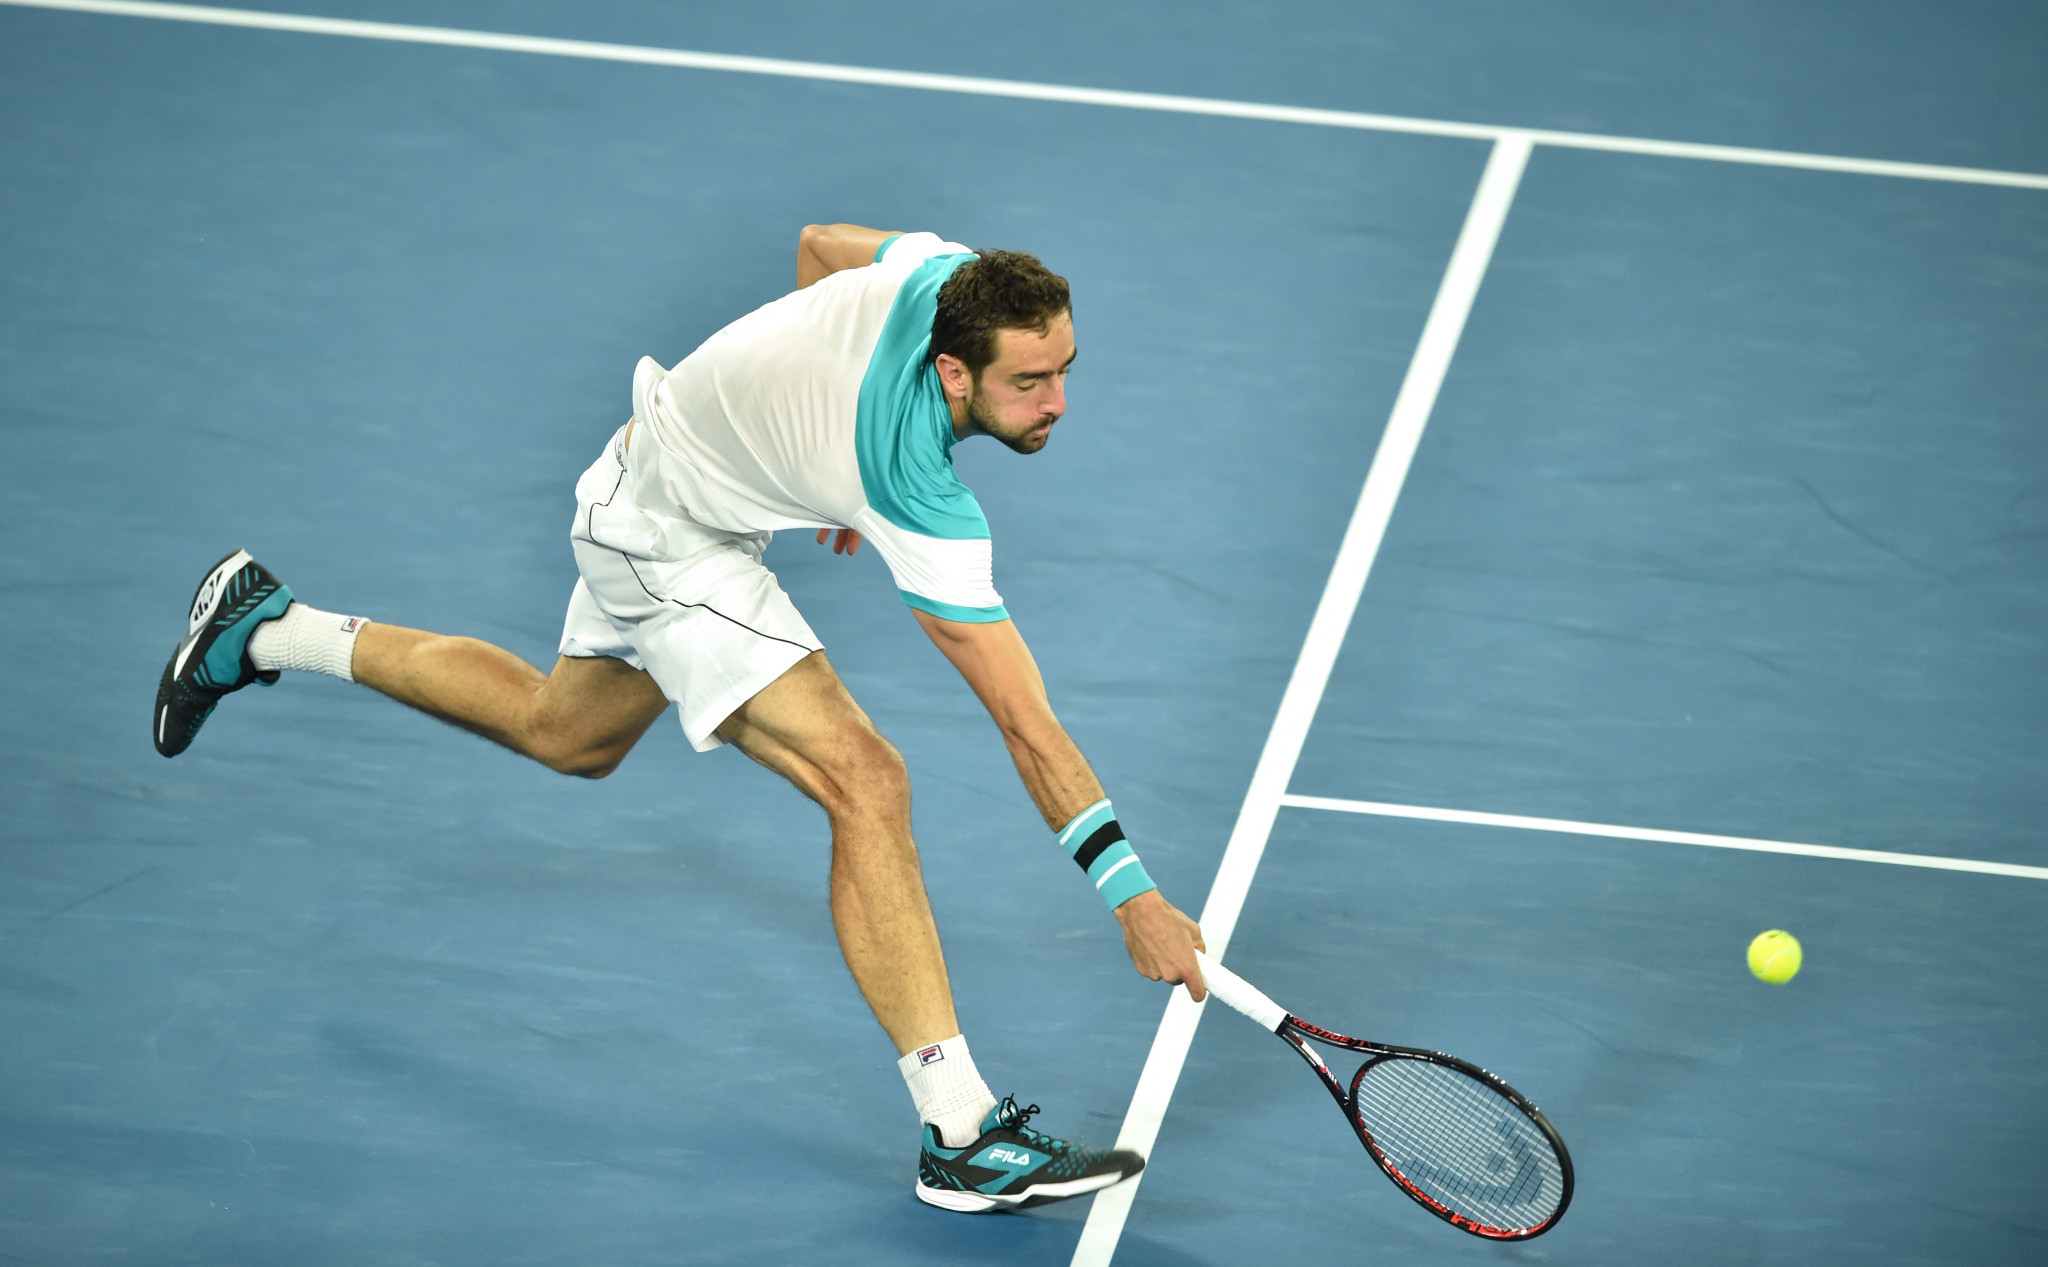 Marin Cilic led 2-0 in the final set before Rafael Nadal called an early halt to the match through injury ©Getty Images